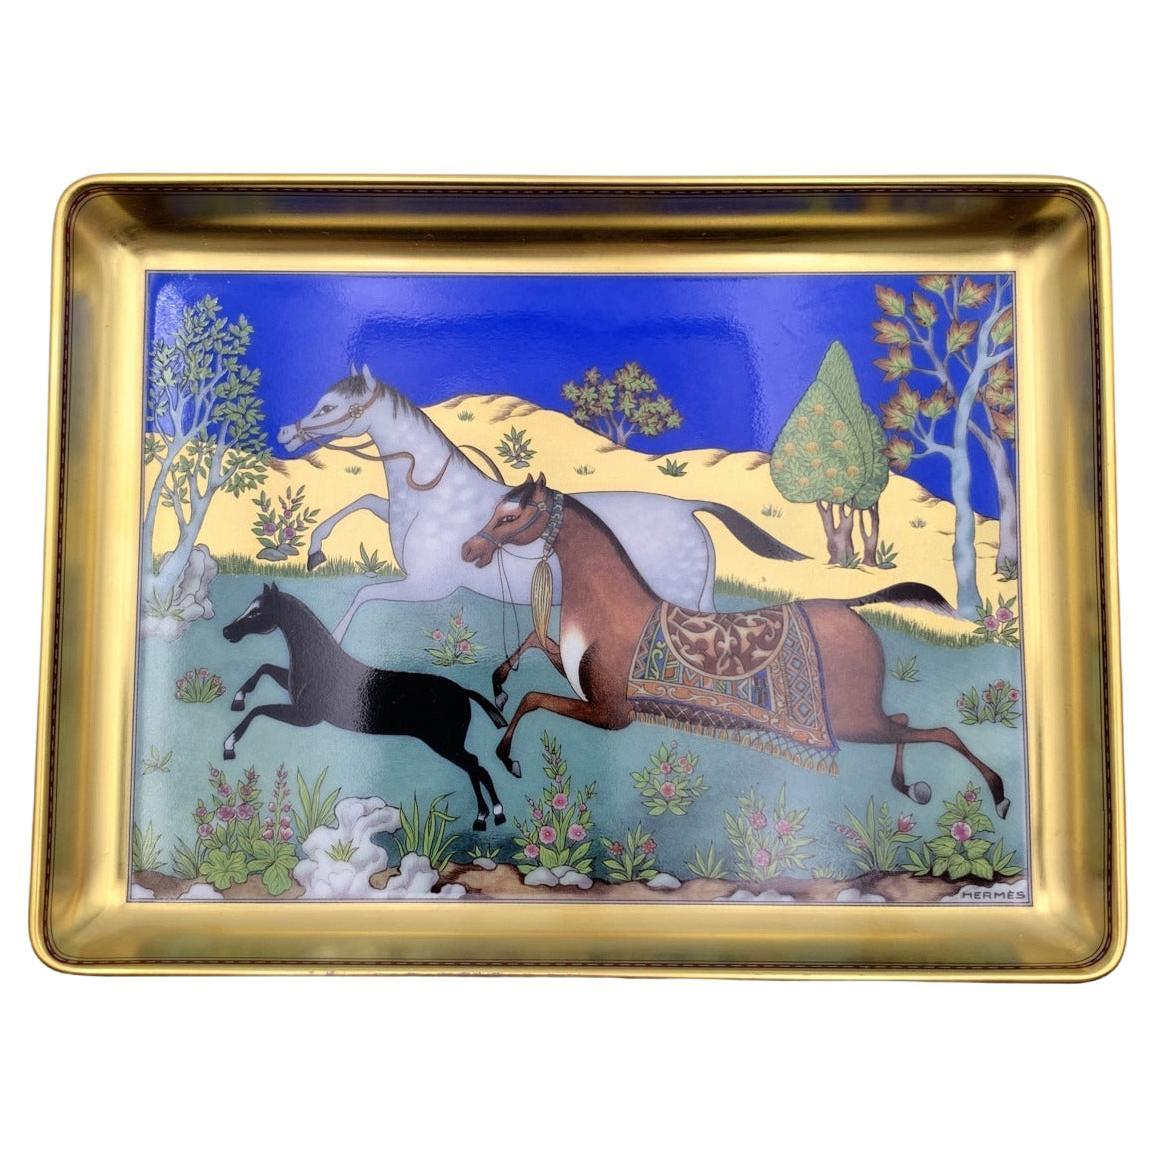 Hermes Gold Porcelain Cheval D'Orient Horse Sushi Plate Change Tray